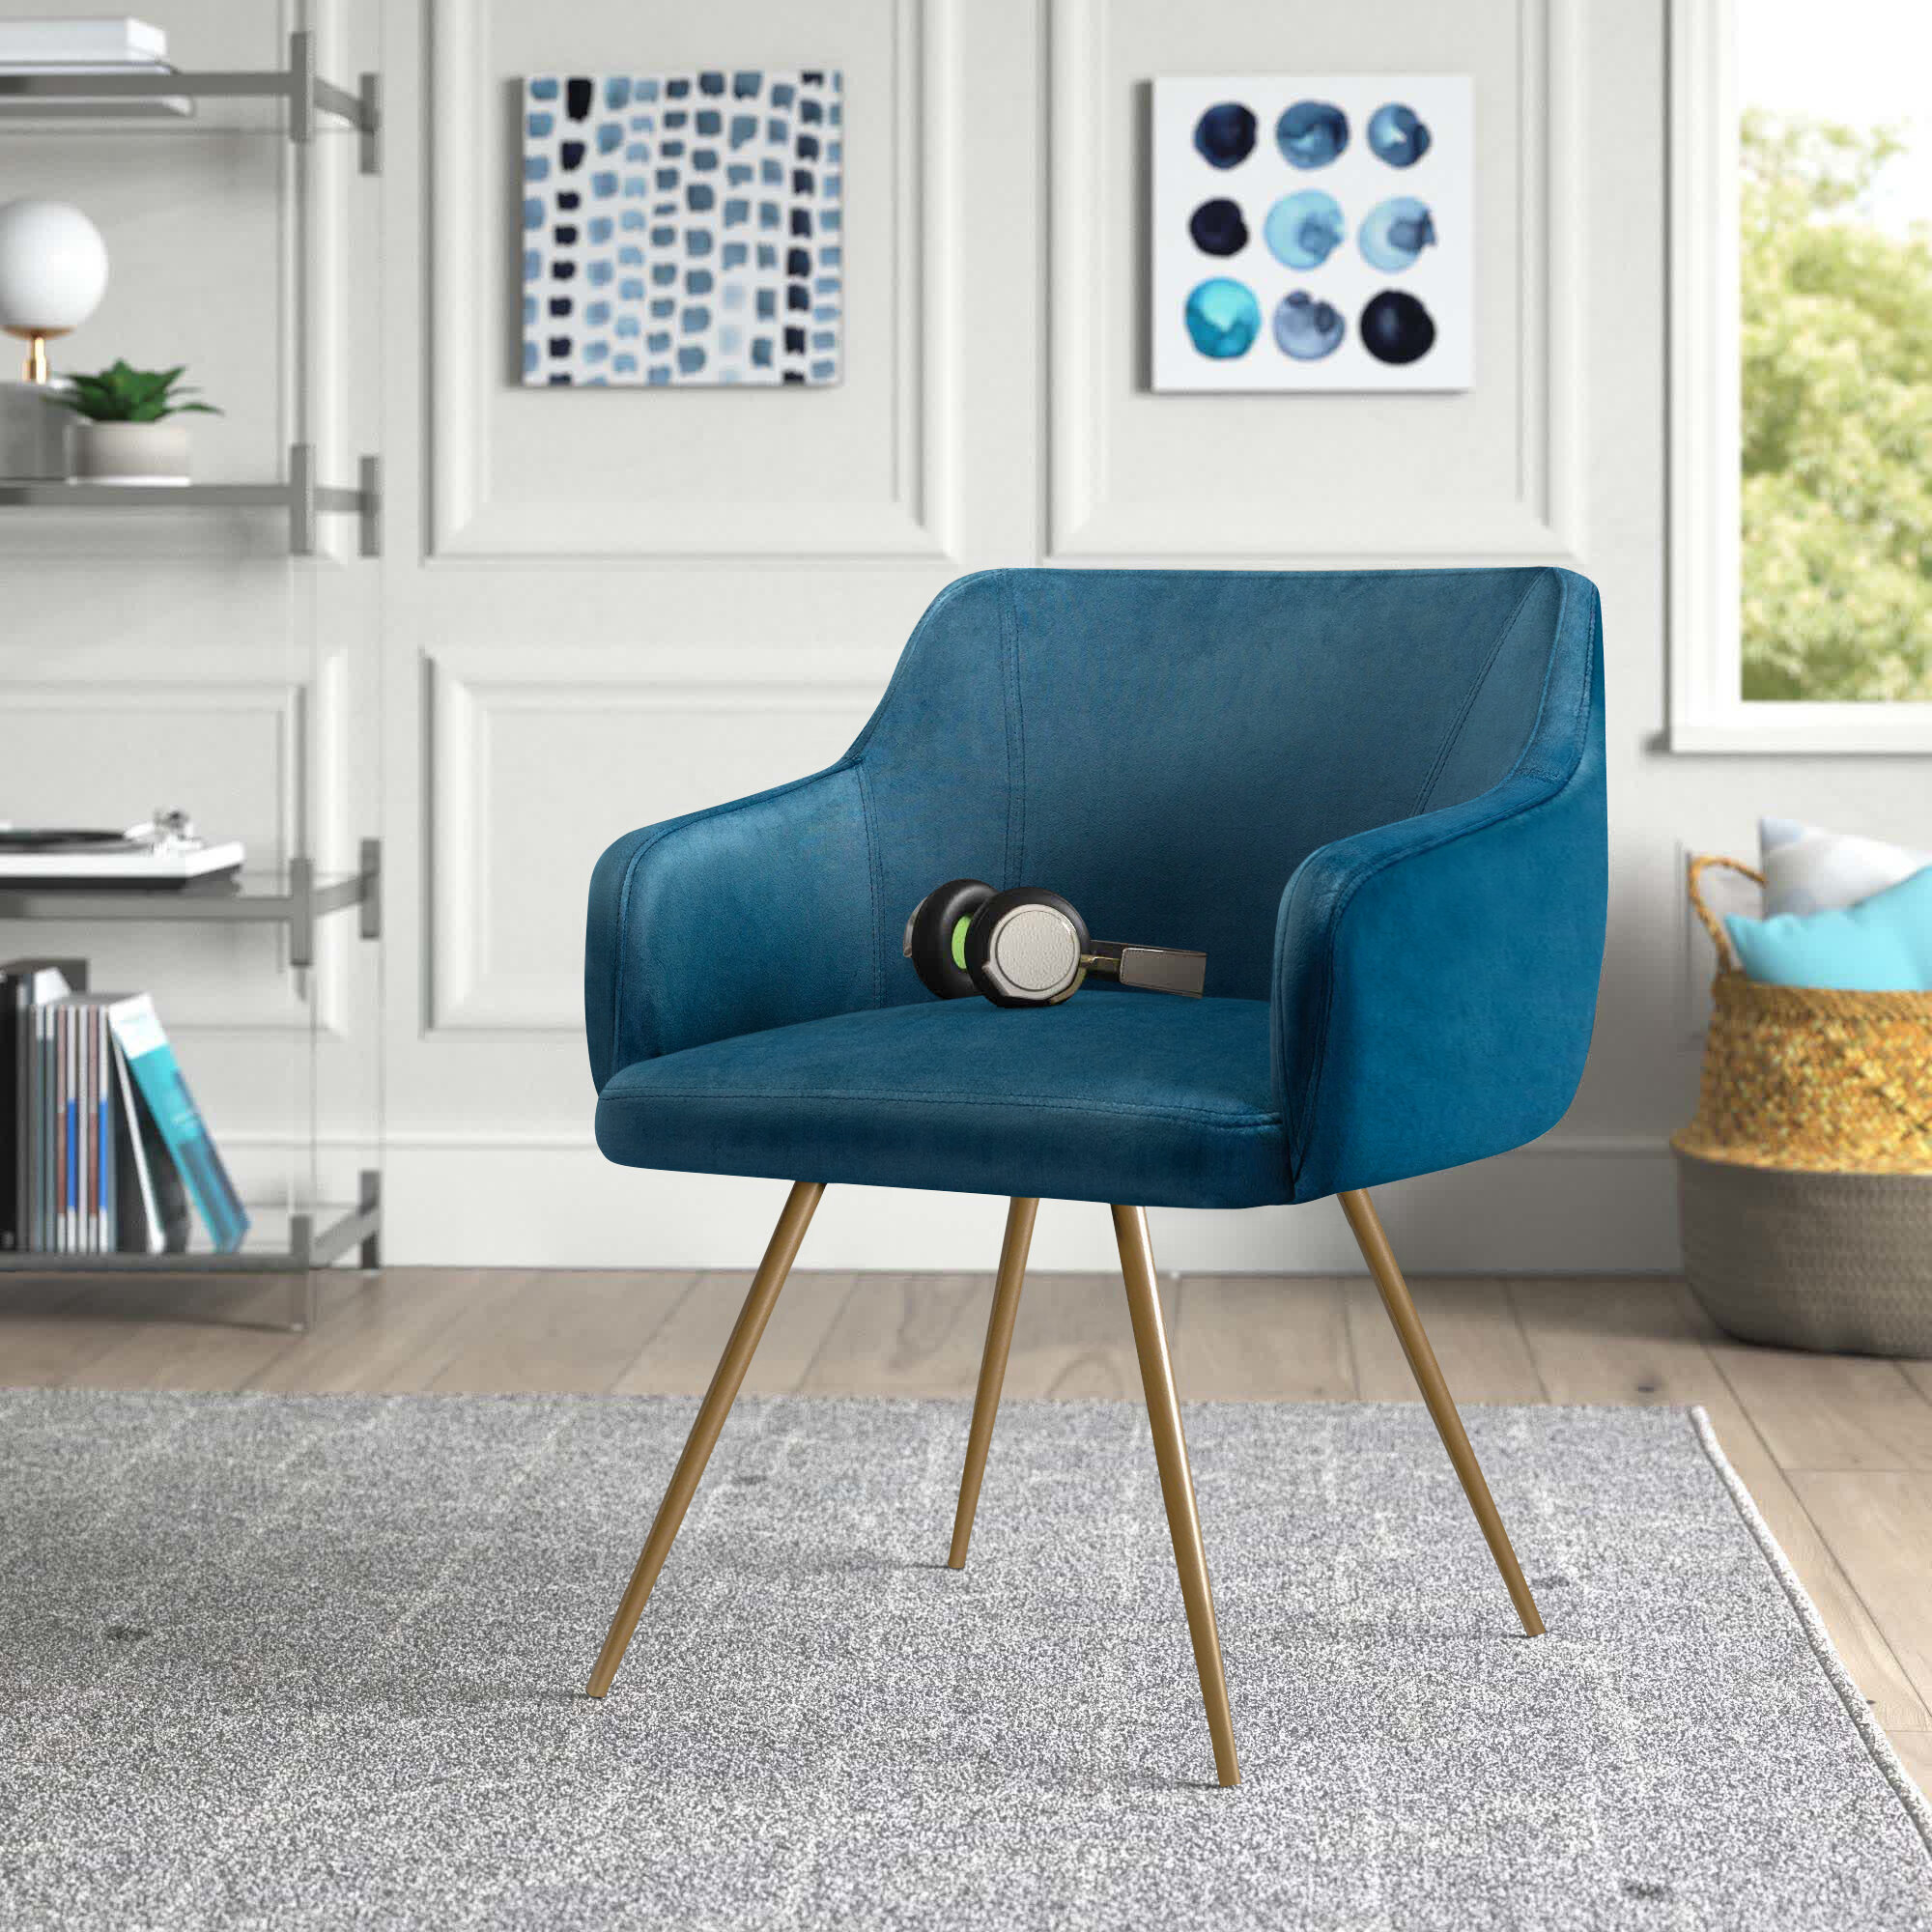 Blue 45cm Upholstered Armchair with Velvet Cover and Round Backrest Channel Tufted Tub Chair with Rubberwood Legs for Bedroom Living Room and More CO-Z Modern Dining Chair